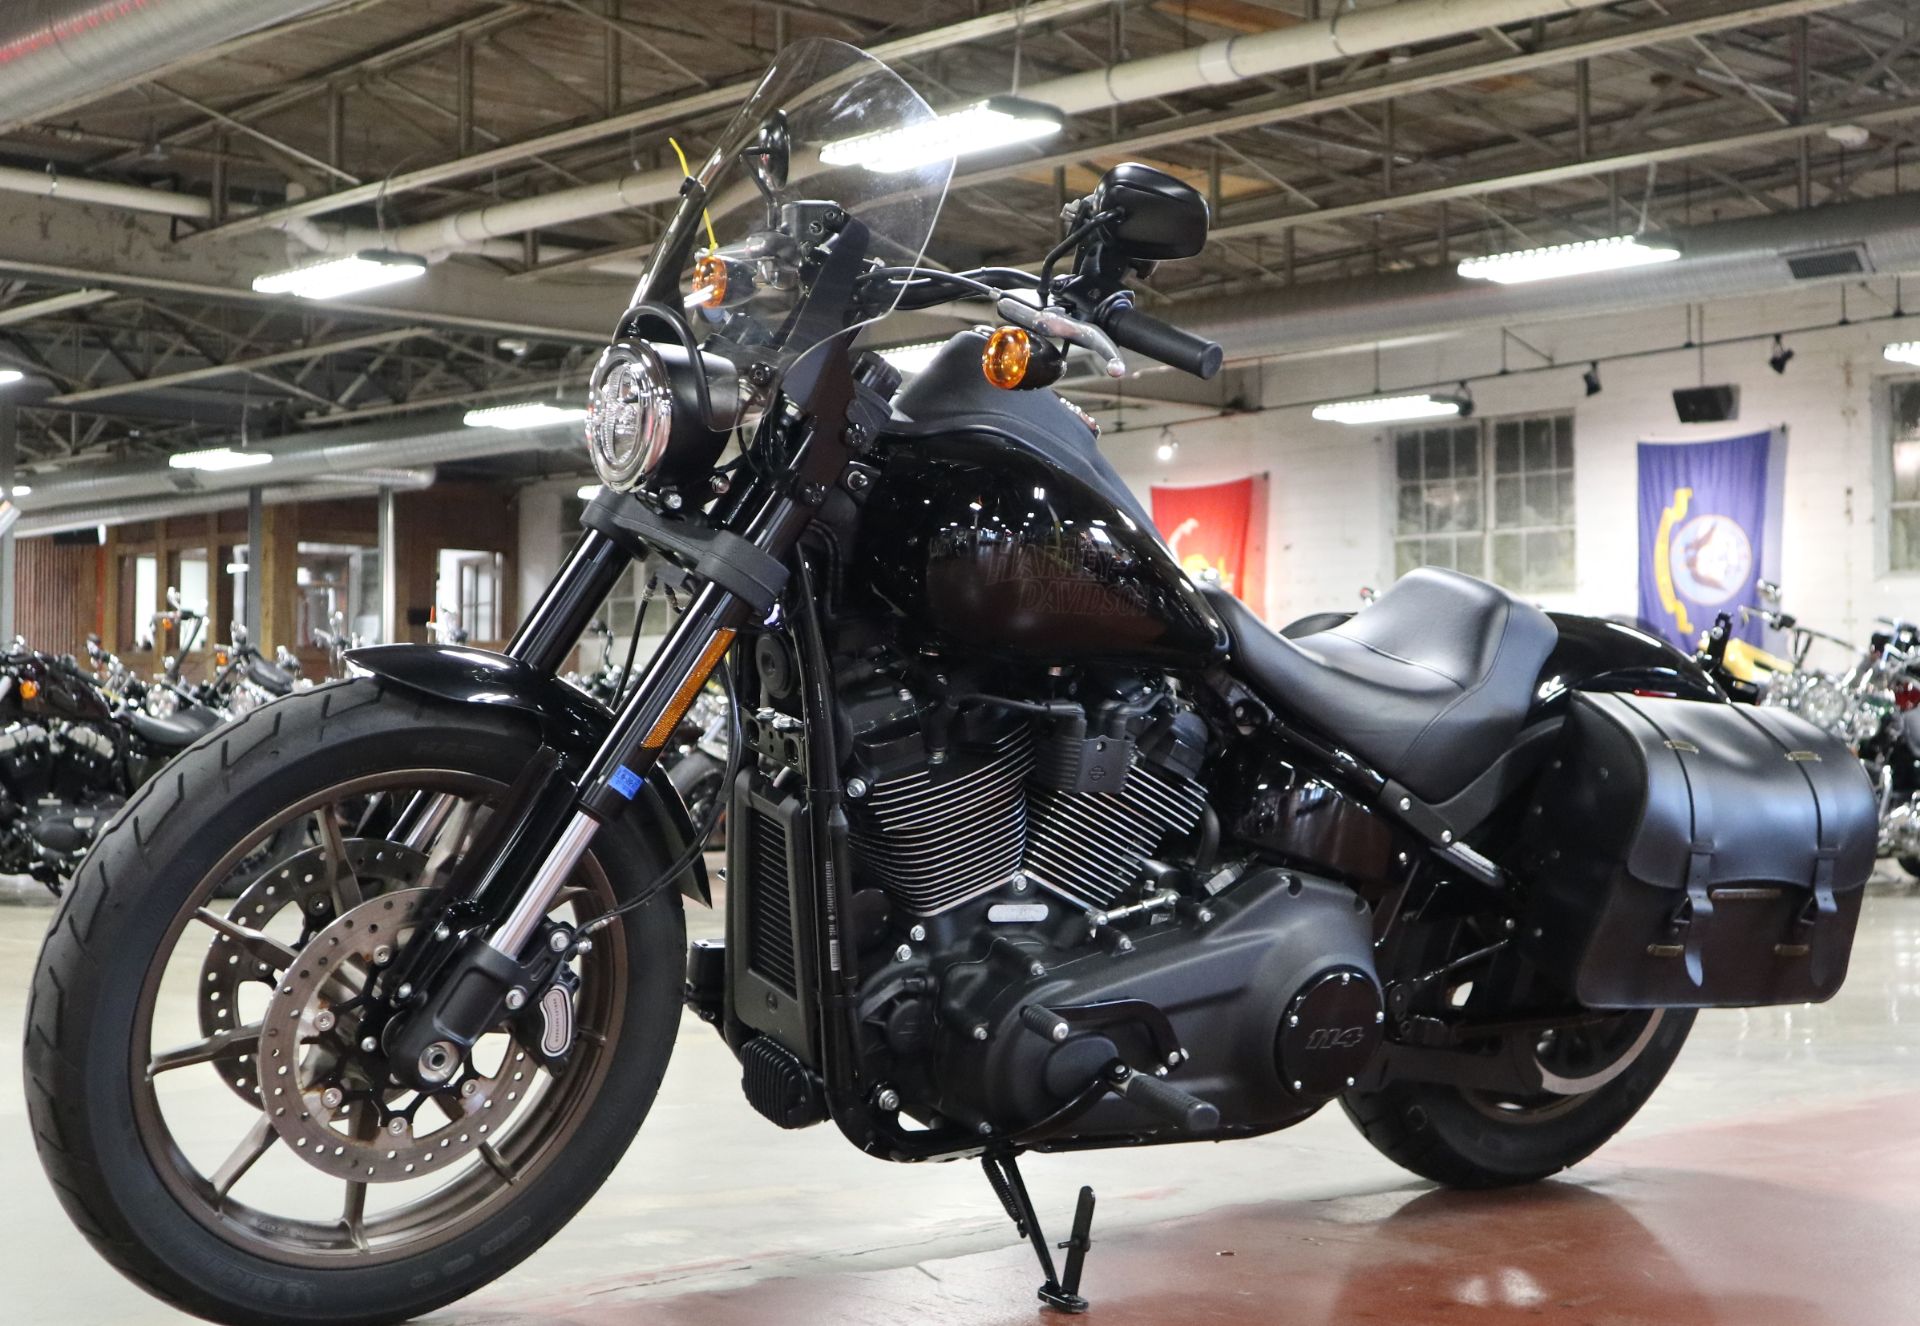 2021 Harley-Davidson Low Rider®S in New London, Connecticut - Photo 4